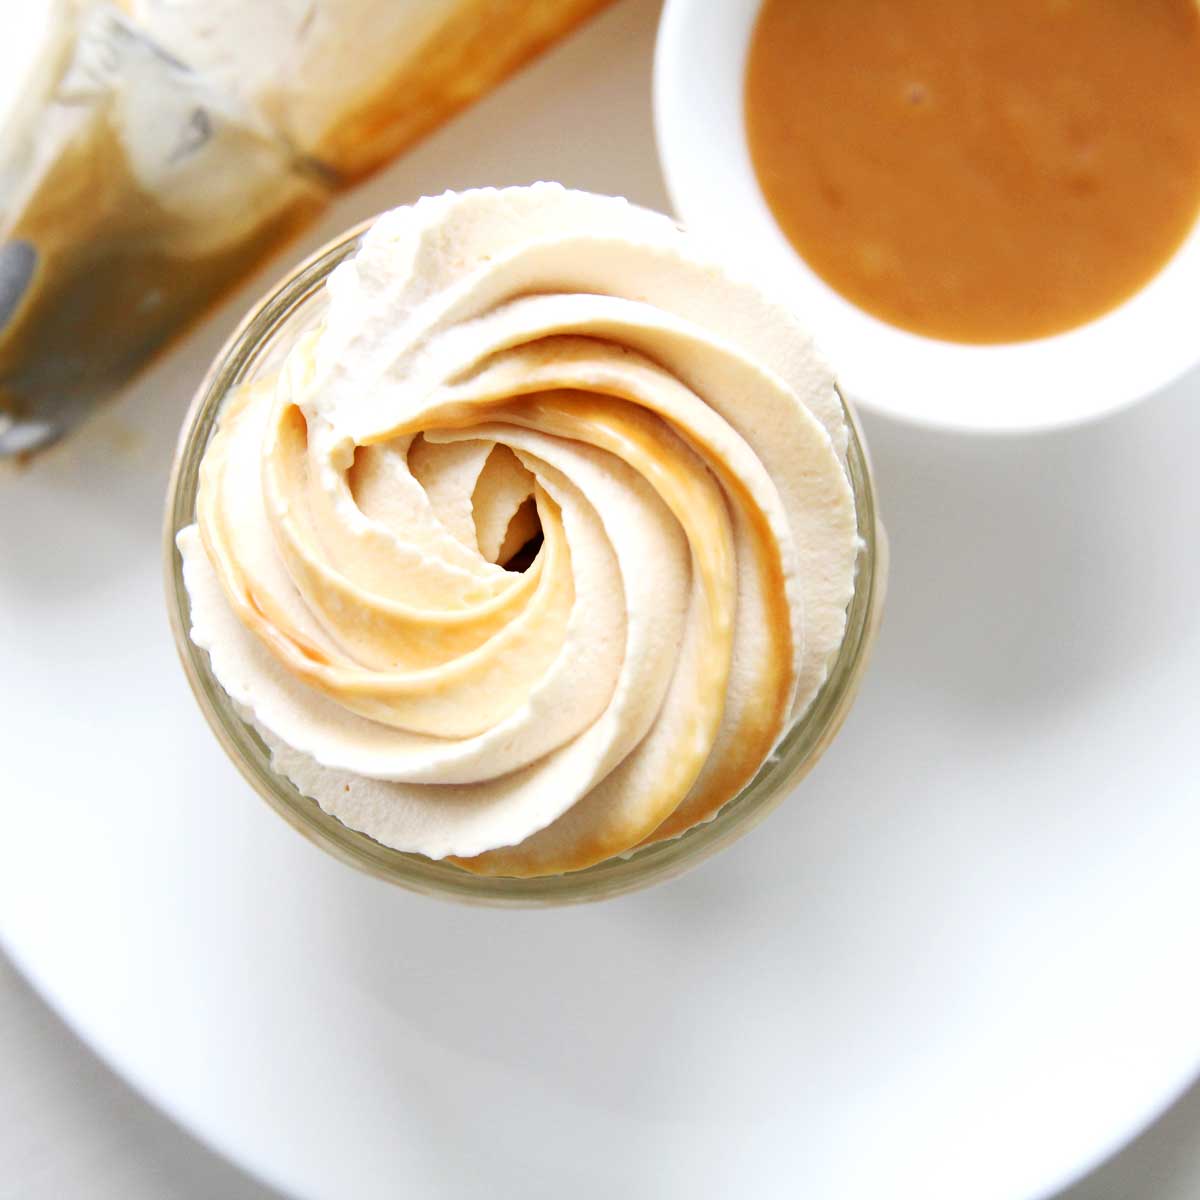 Swirled Caramel Whipped Cream Recipe Perfect for Coffee, Cakes and More - Whipped Cream Recipes